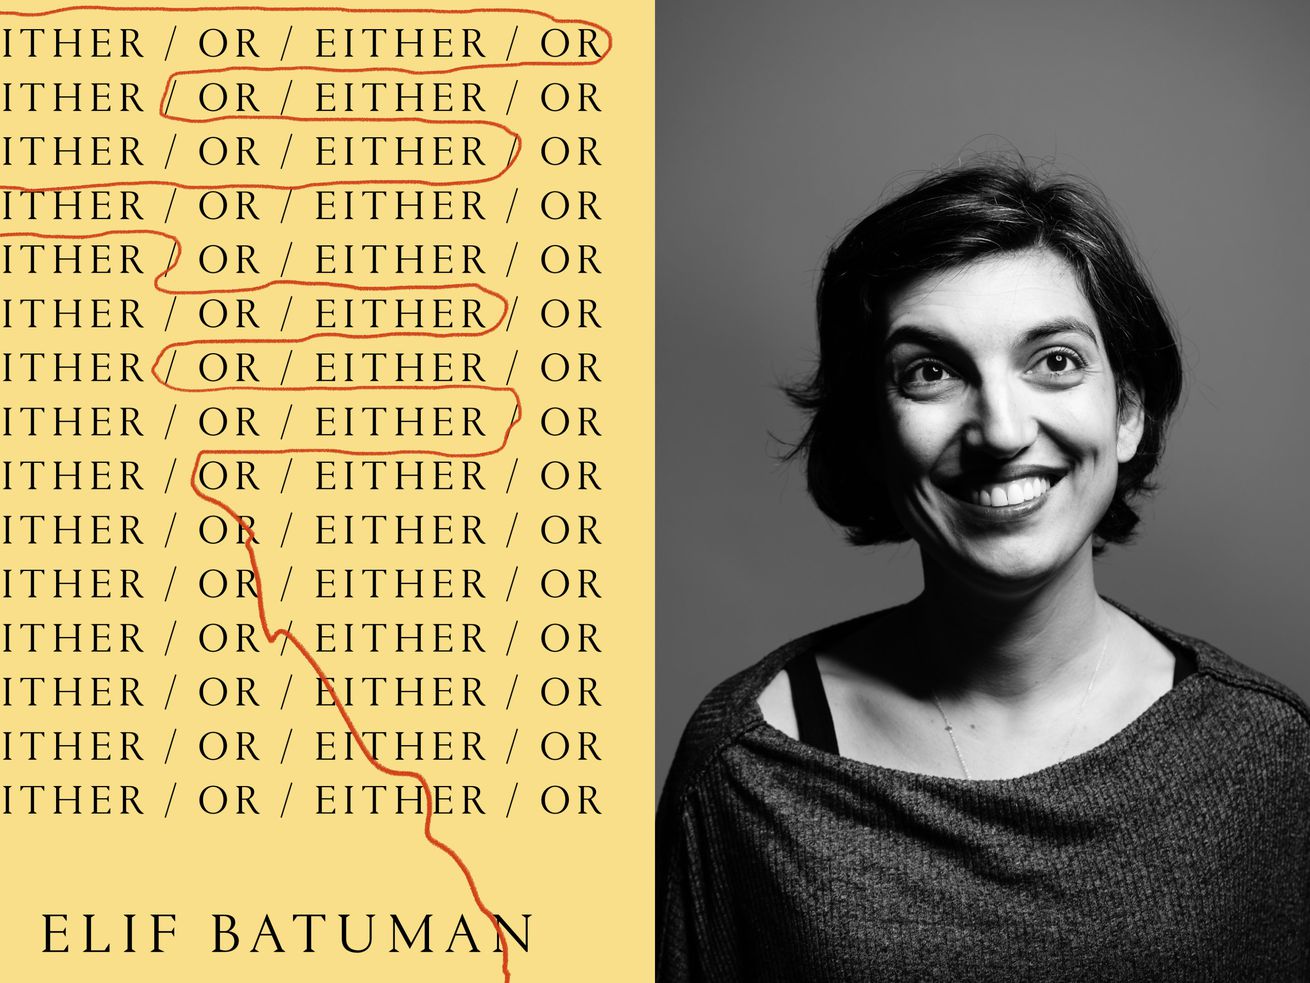 Elif Batuman’s Either/Or is a portrait of the artist as a young idiot